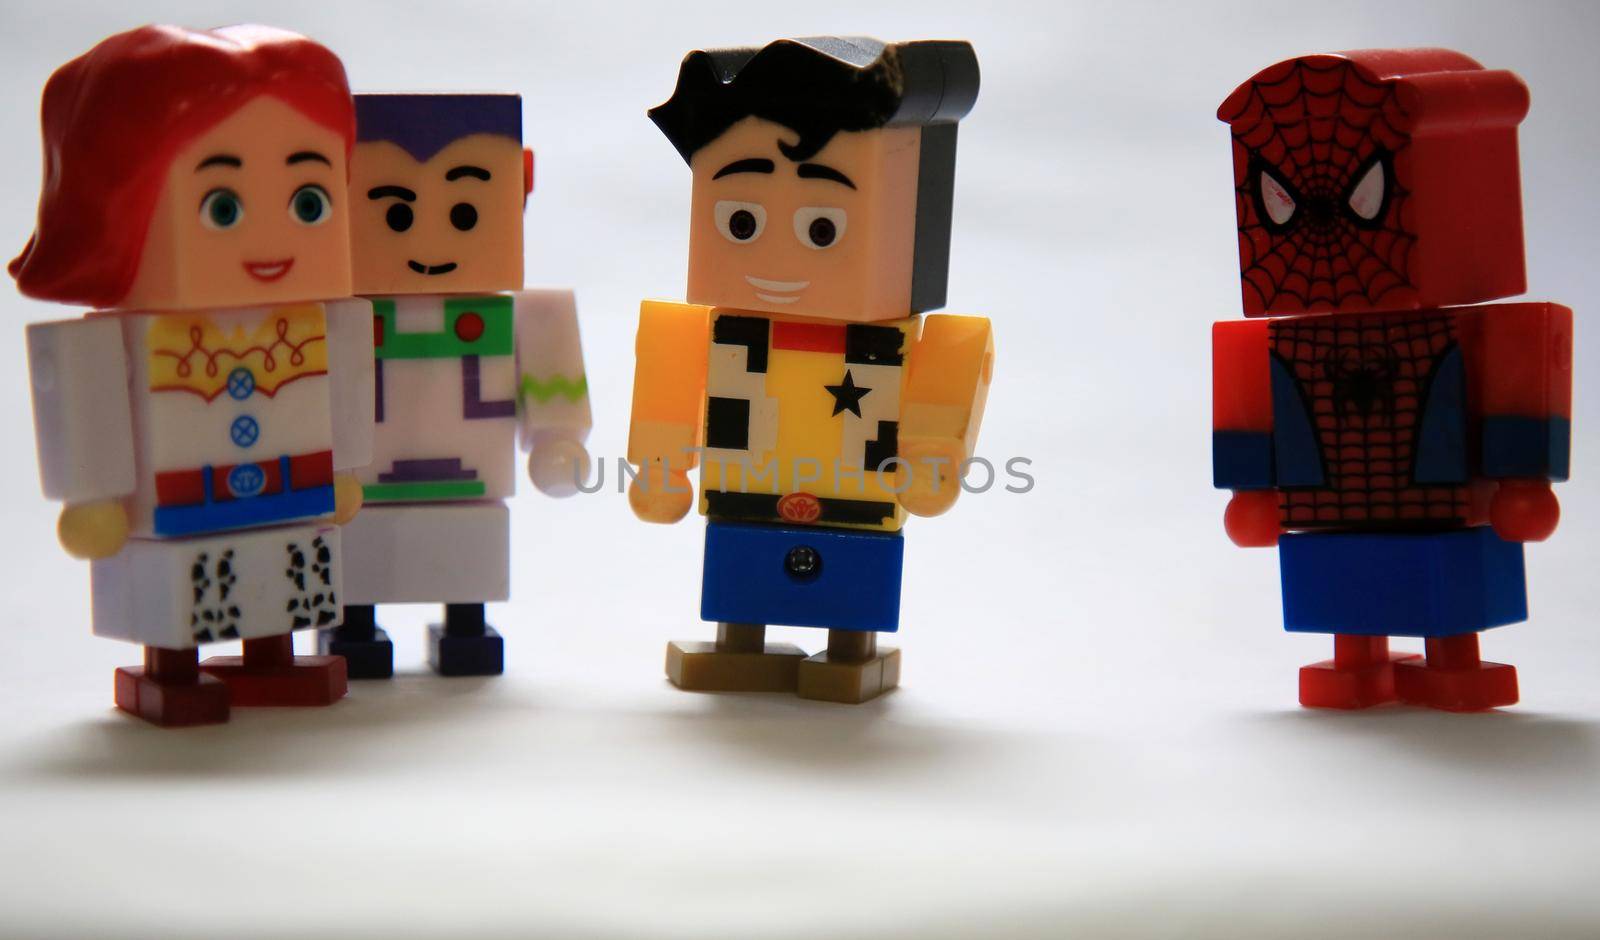 salvador, bahia / brazil - may 20, 2020: Jessie, Buzz Lightyear and Sheriff Woody character from the Toy Story and Spider man cartoon, made with 3d printer.
